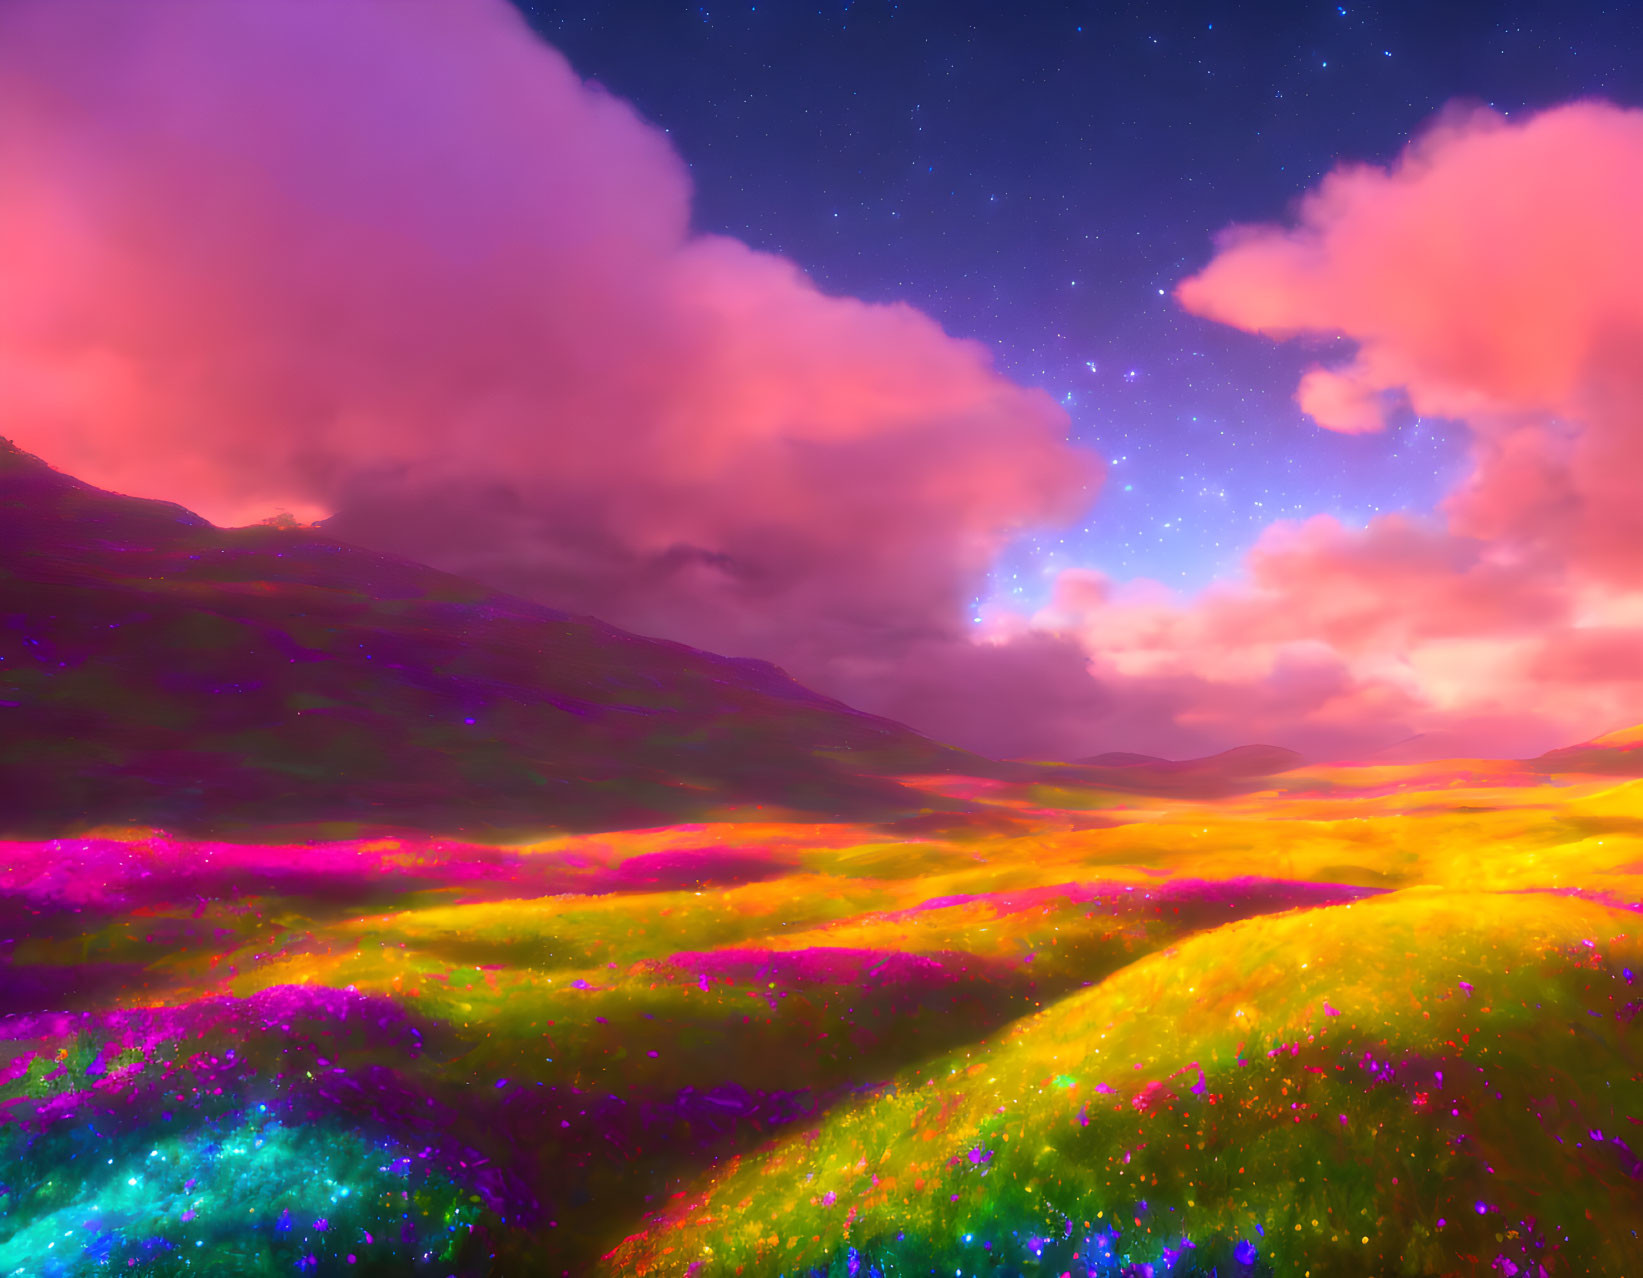 Vibrant landscape of rolling hills under starry sky with pink and yellow hues and colorful flora